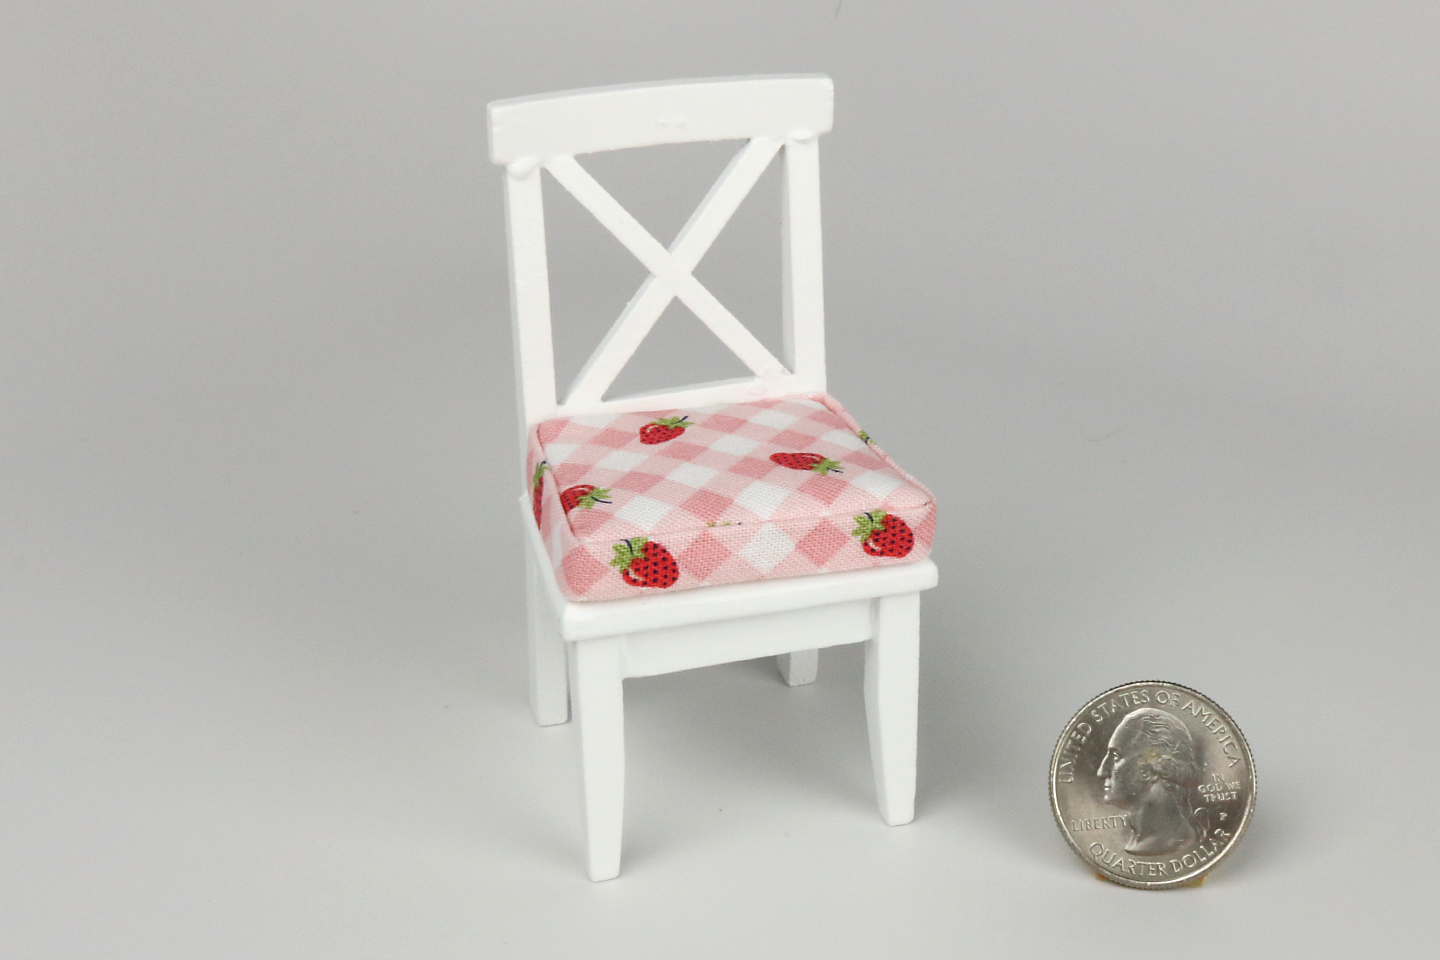 Strawberry Picnic Dining Set in Pink